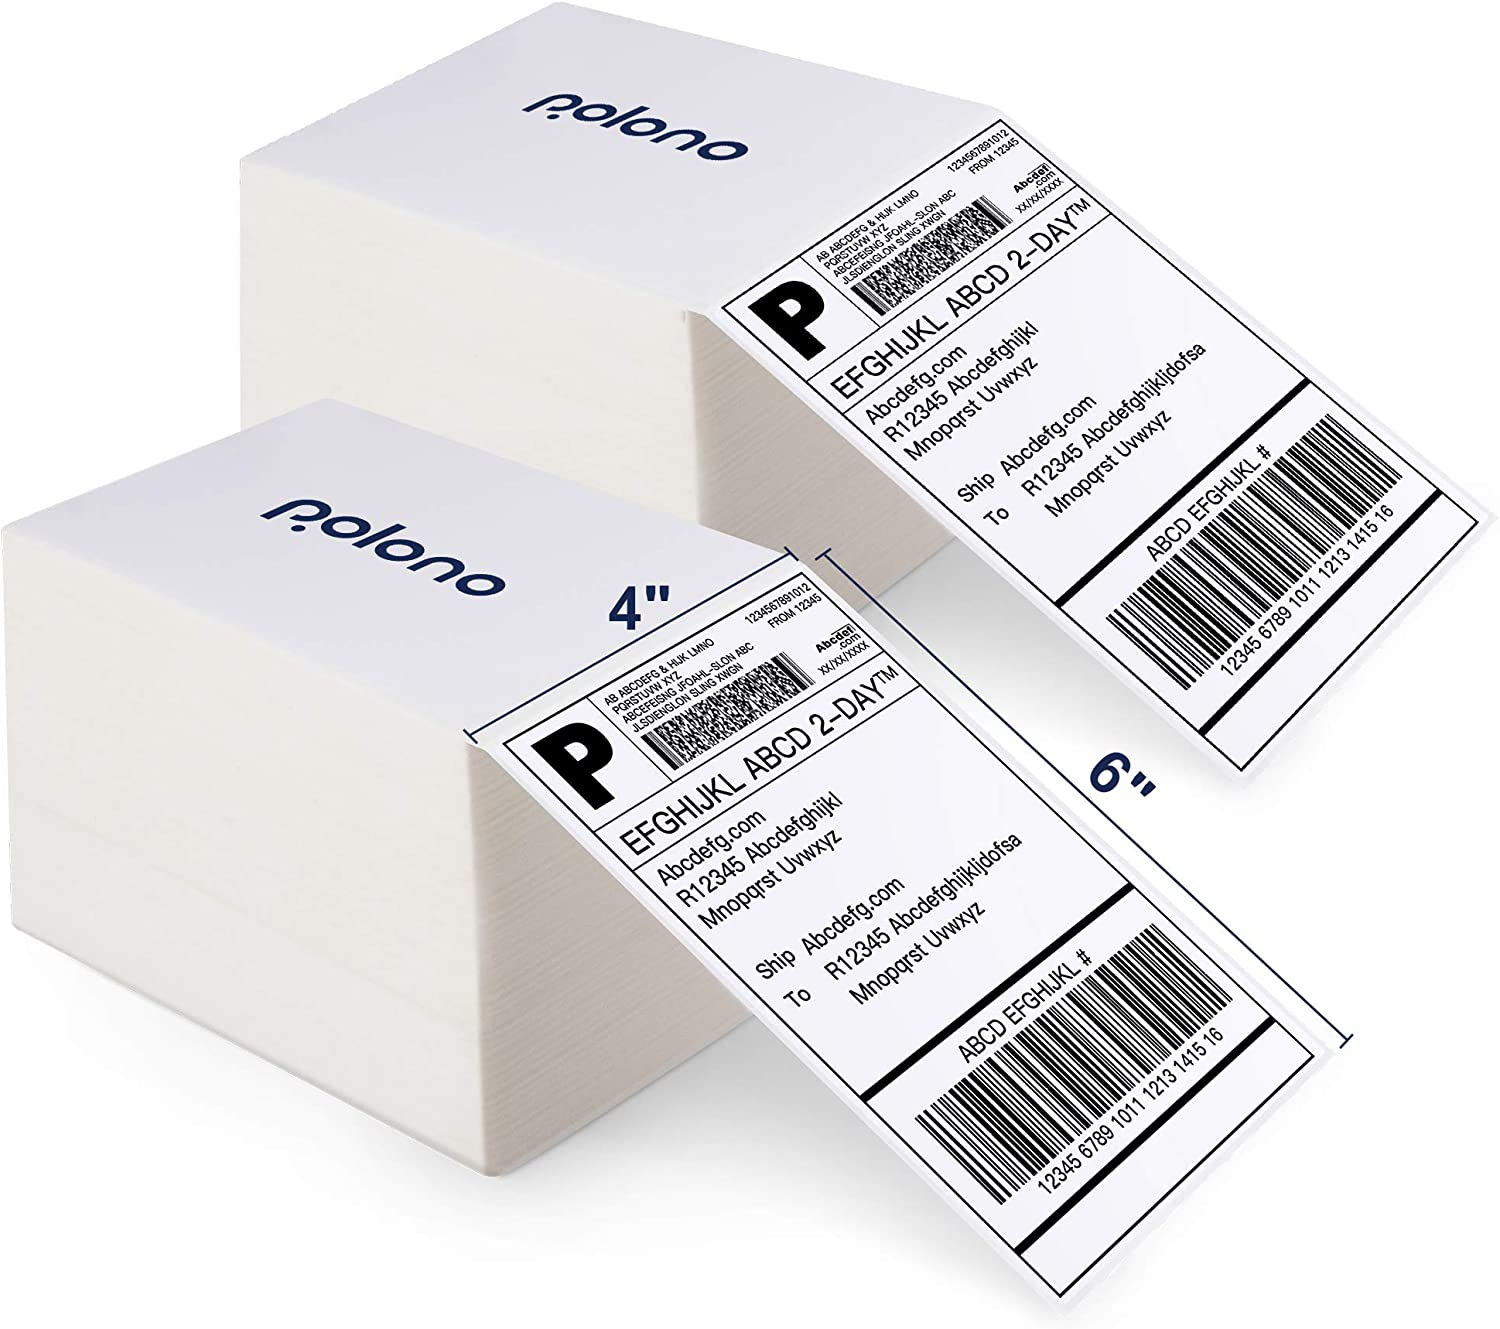 iDPRT Shipping Labels - 4×6 Thermal Direct Shipping Label, Fan-Fold Labels,  Thermal Shipping Label for Label Printer, 500 Labels Per Stack, Address